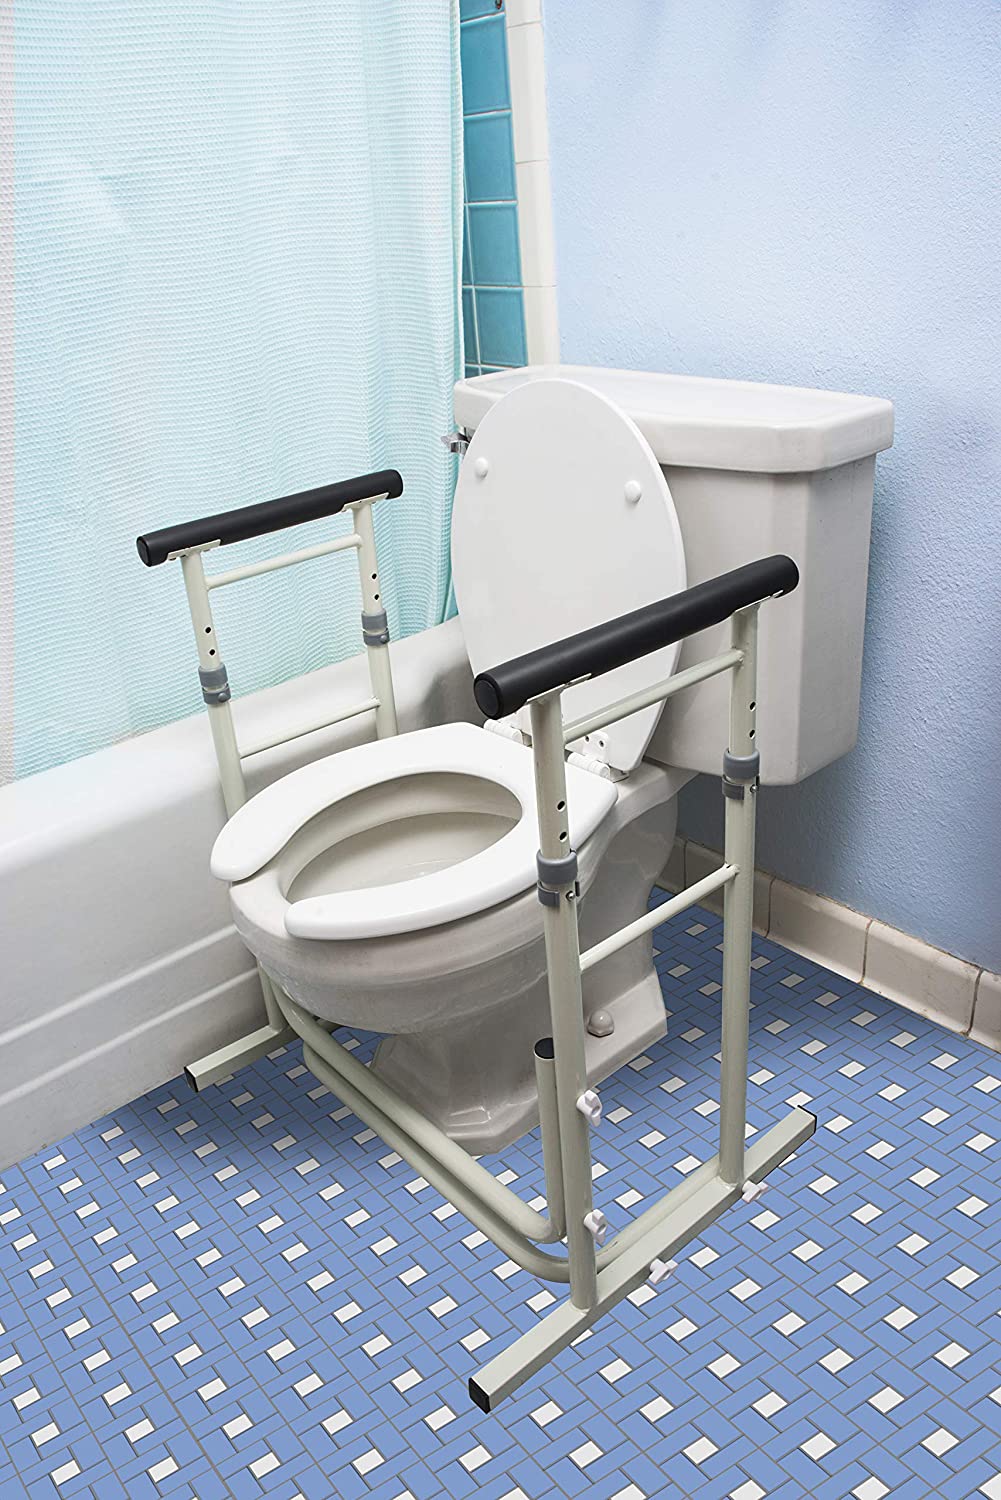 Essential Medical Supply Height Adjustable Standing Toilet Safety Frame with Foam Handles - Senior.com Toilet Safety Frames